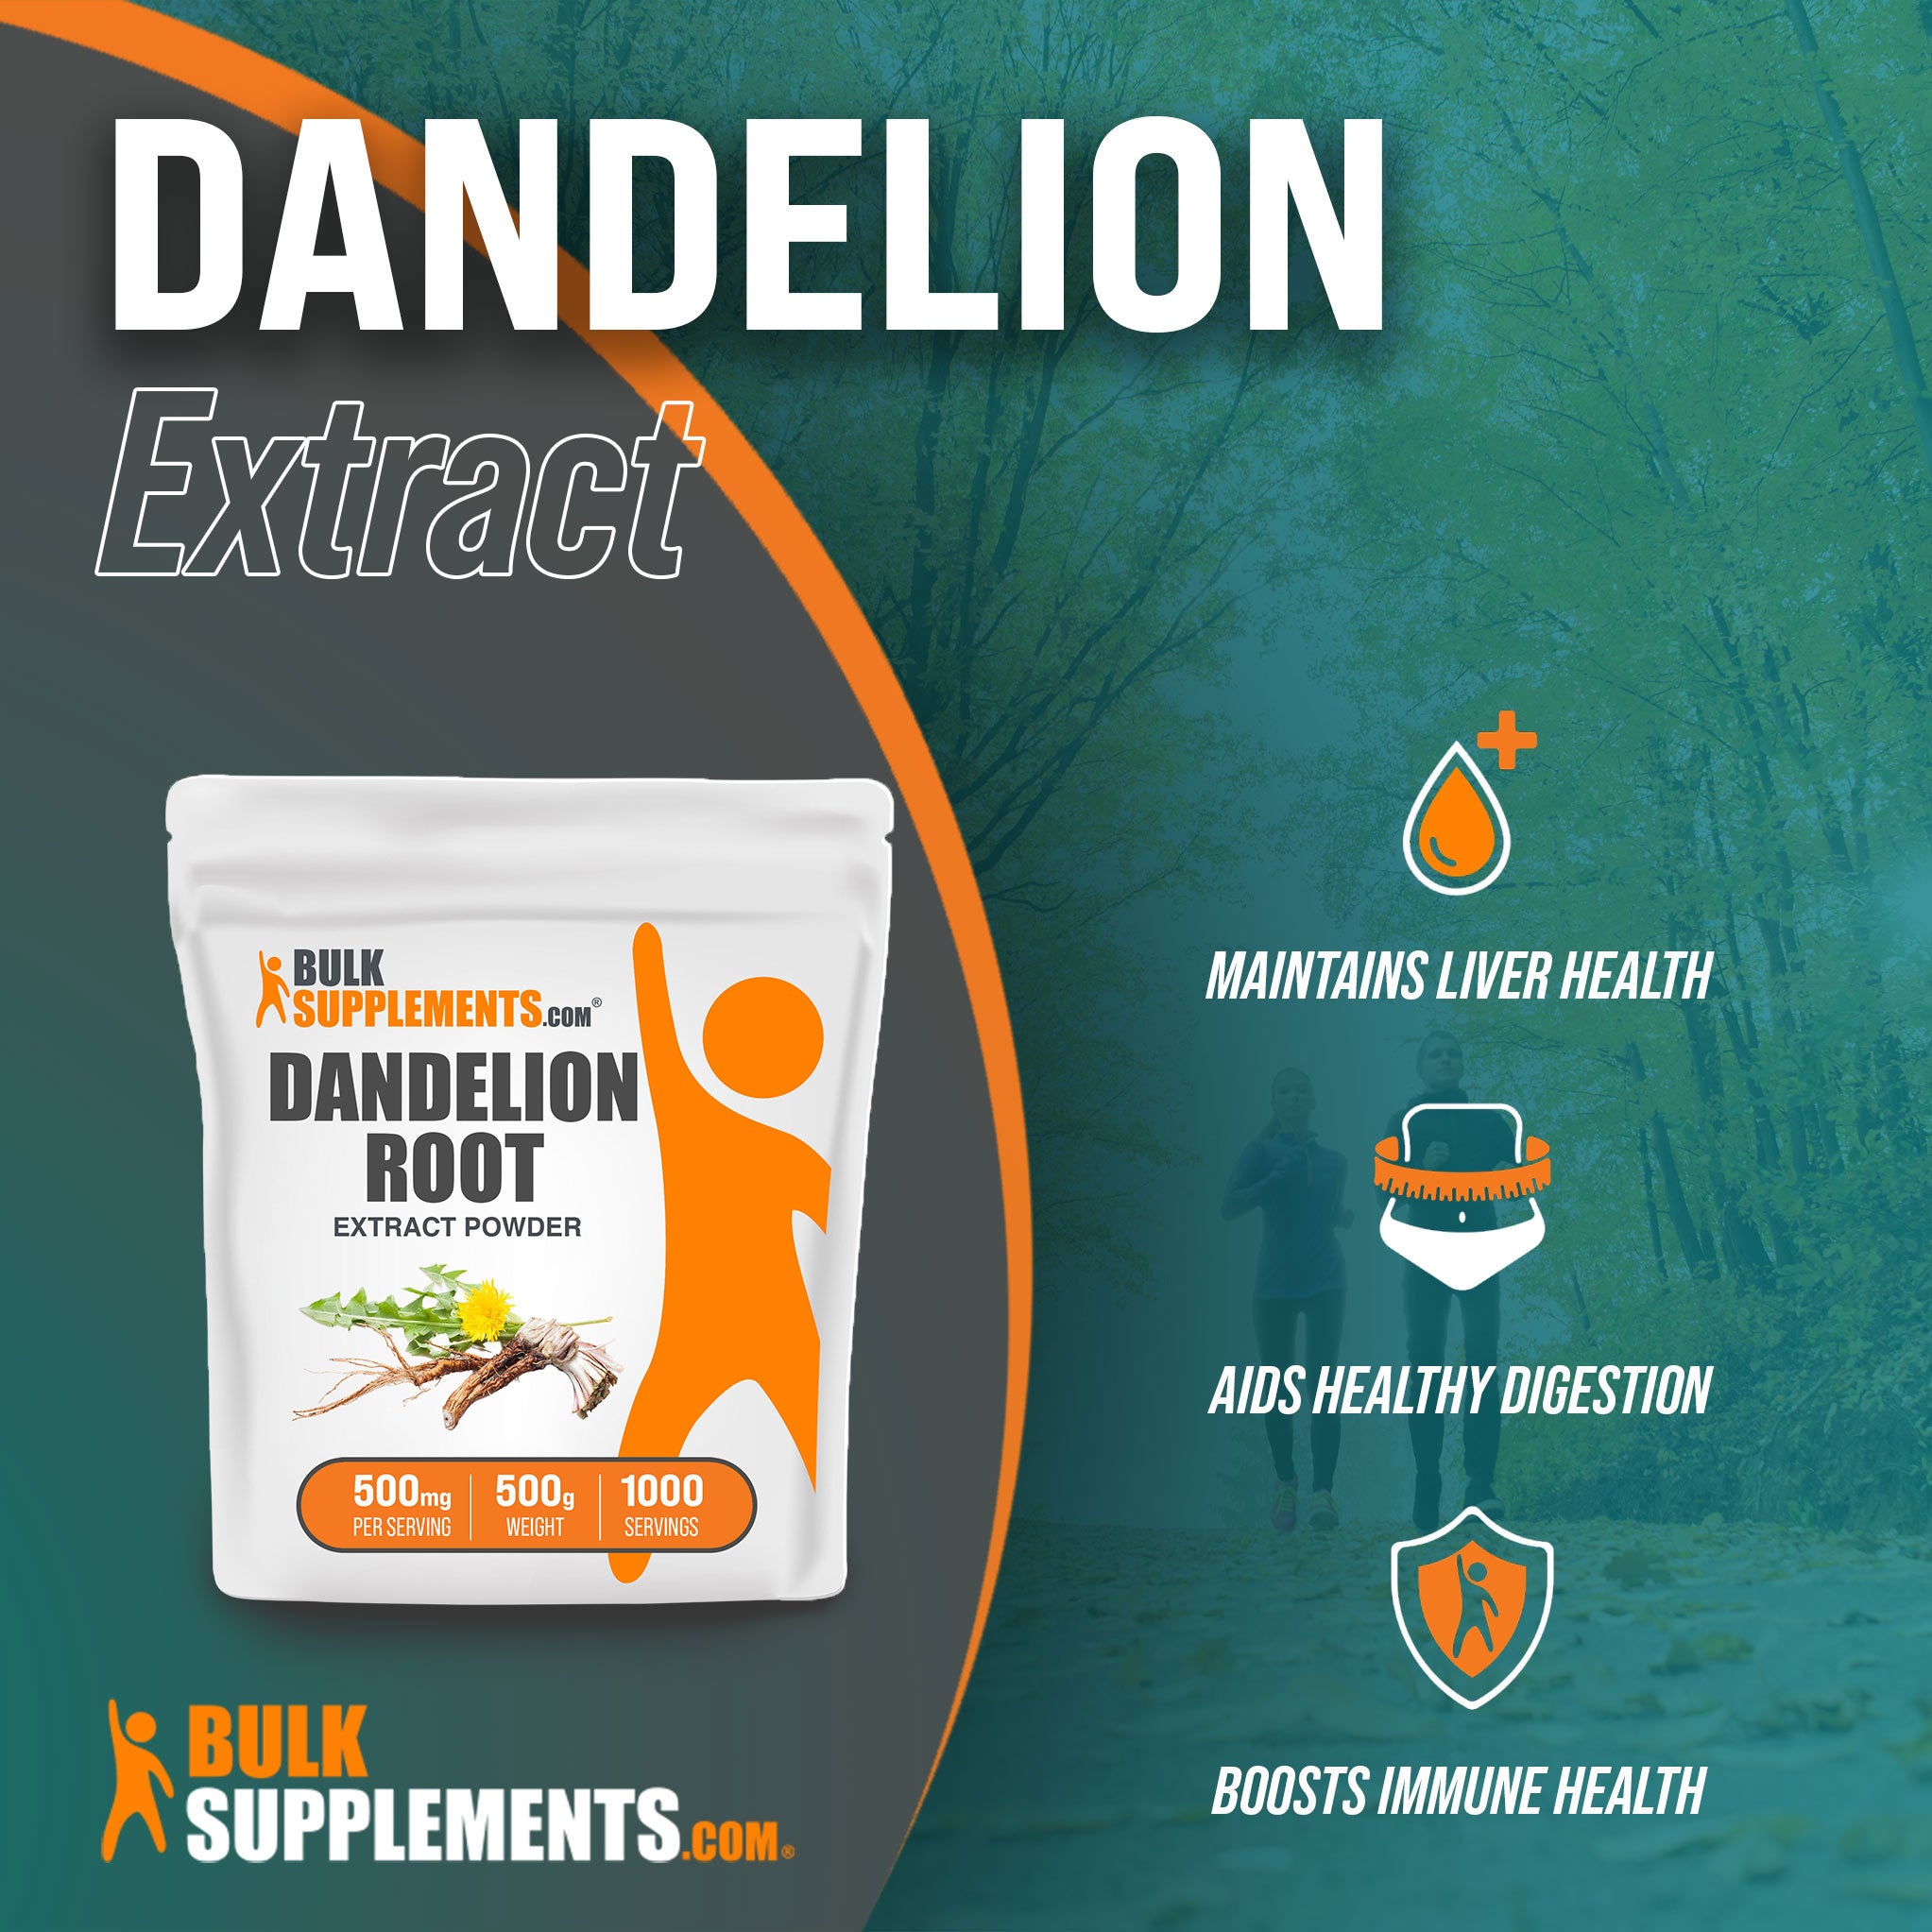 Benefits of Dandelion Extract; maintains liver health, aids healthy digestion, boosts immune health